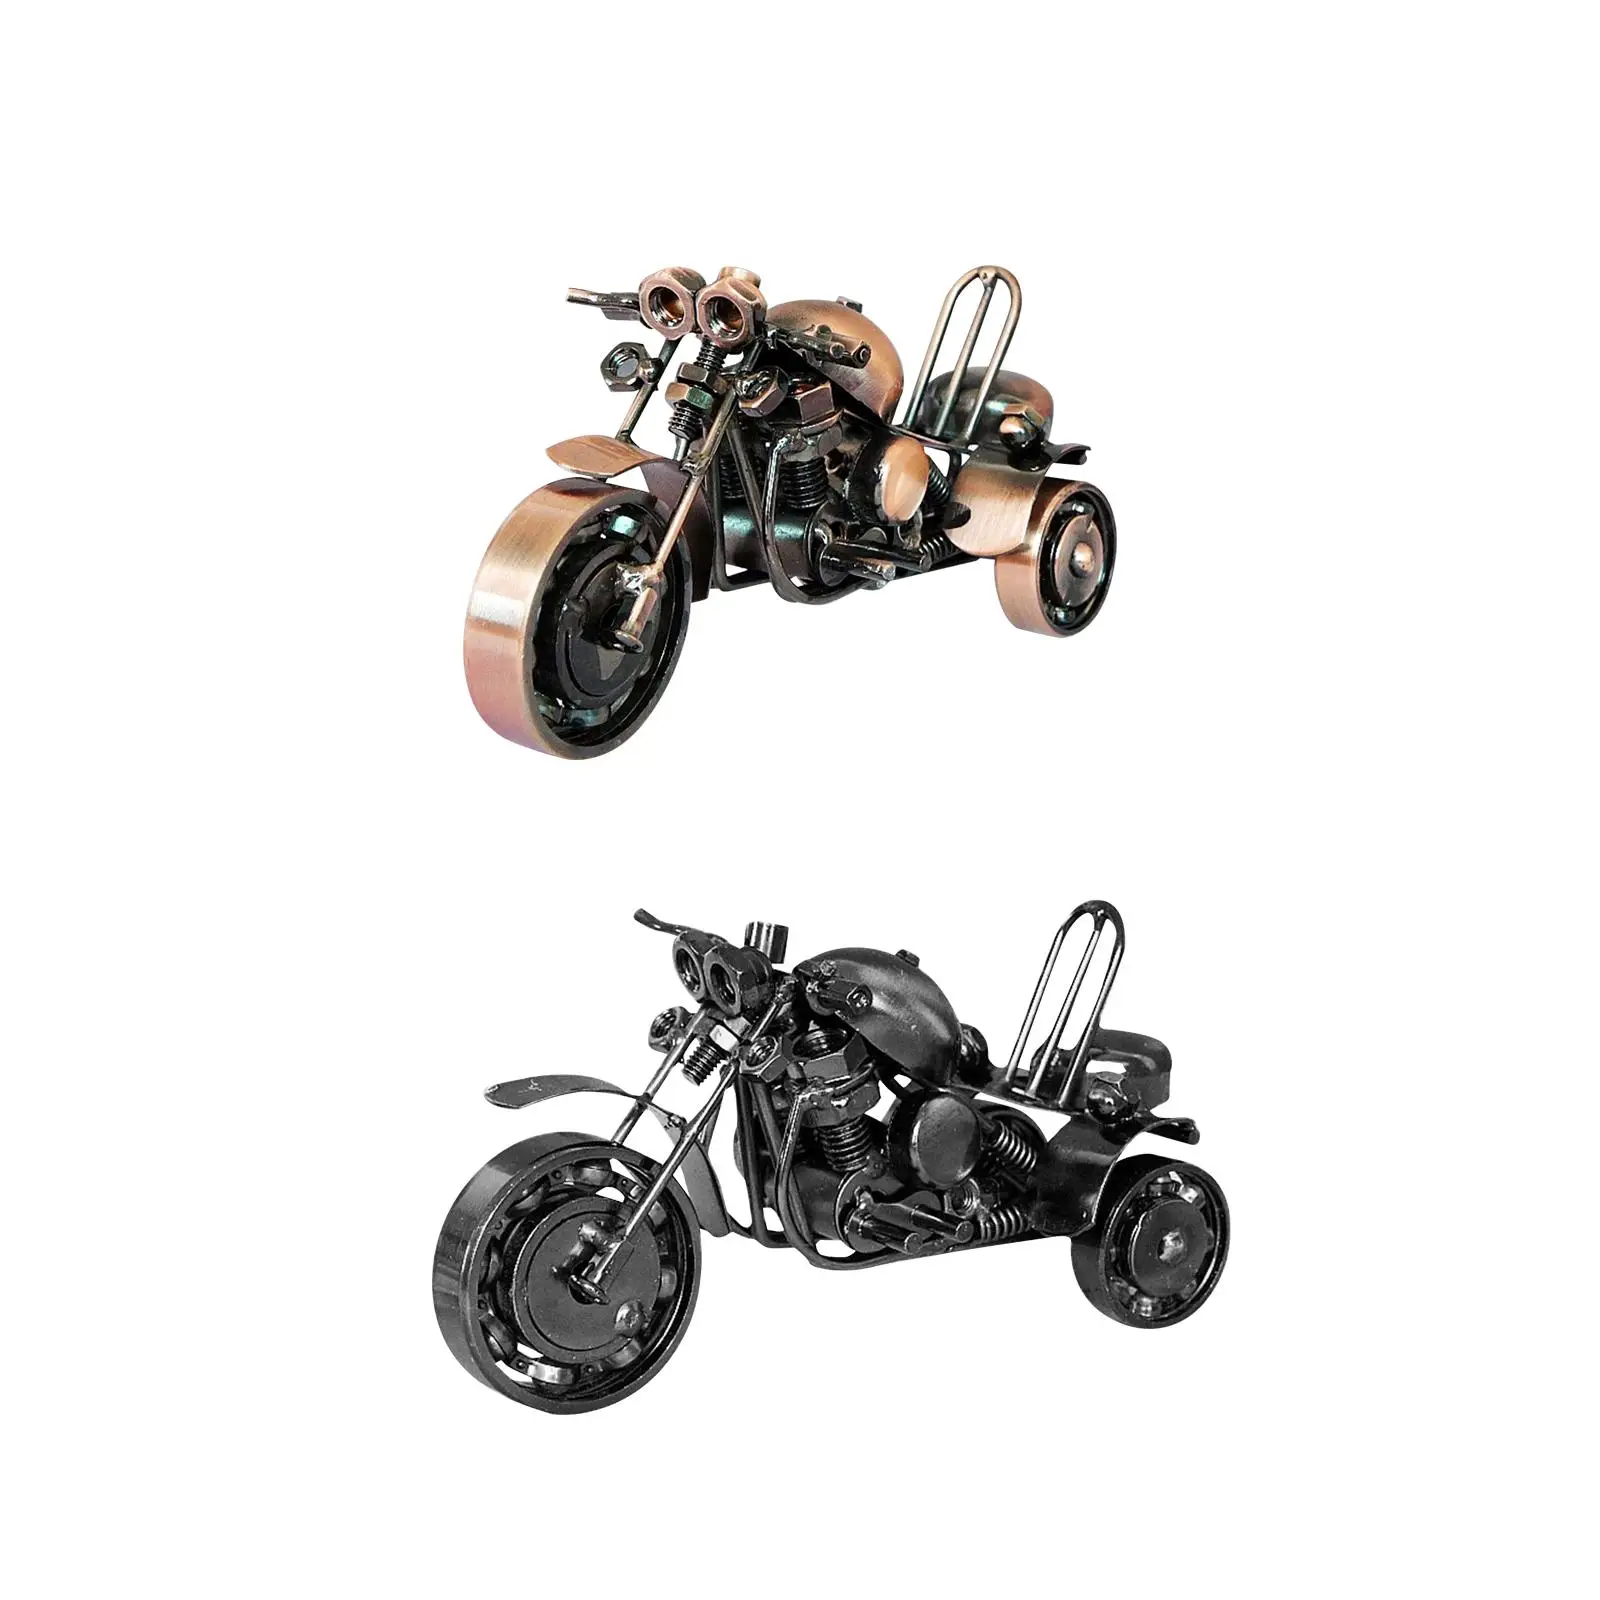 

Motor Tricycle Iron Art Sculpture Motorcycle Model Handmade 16x6.5x8.5cm Collection for Club Bar Decor Durable Multifunctional